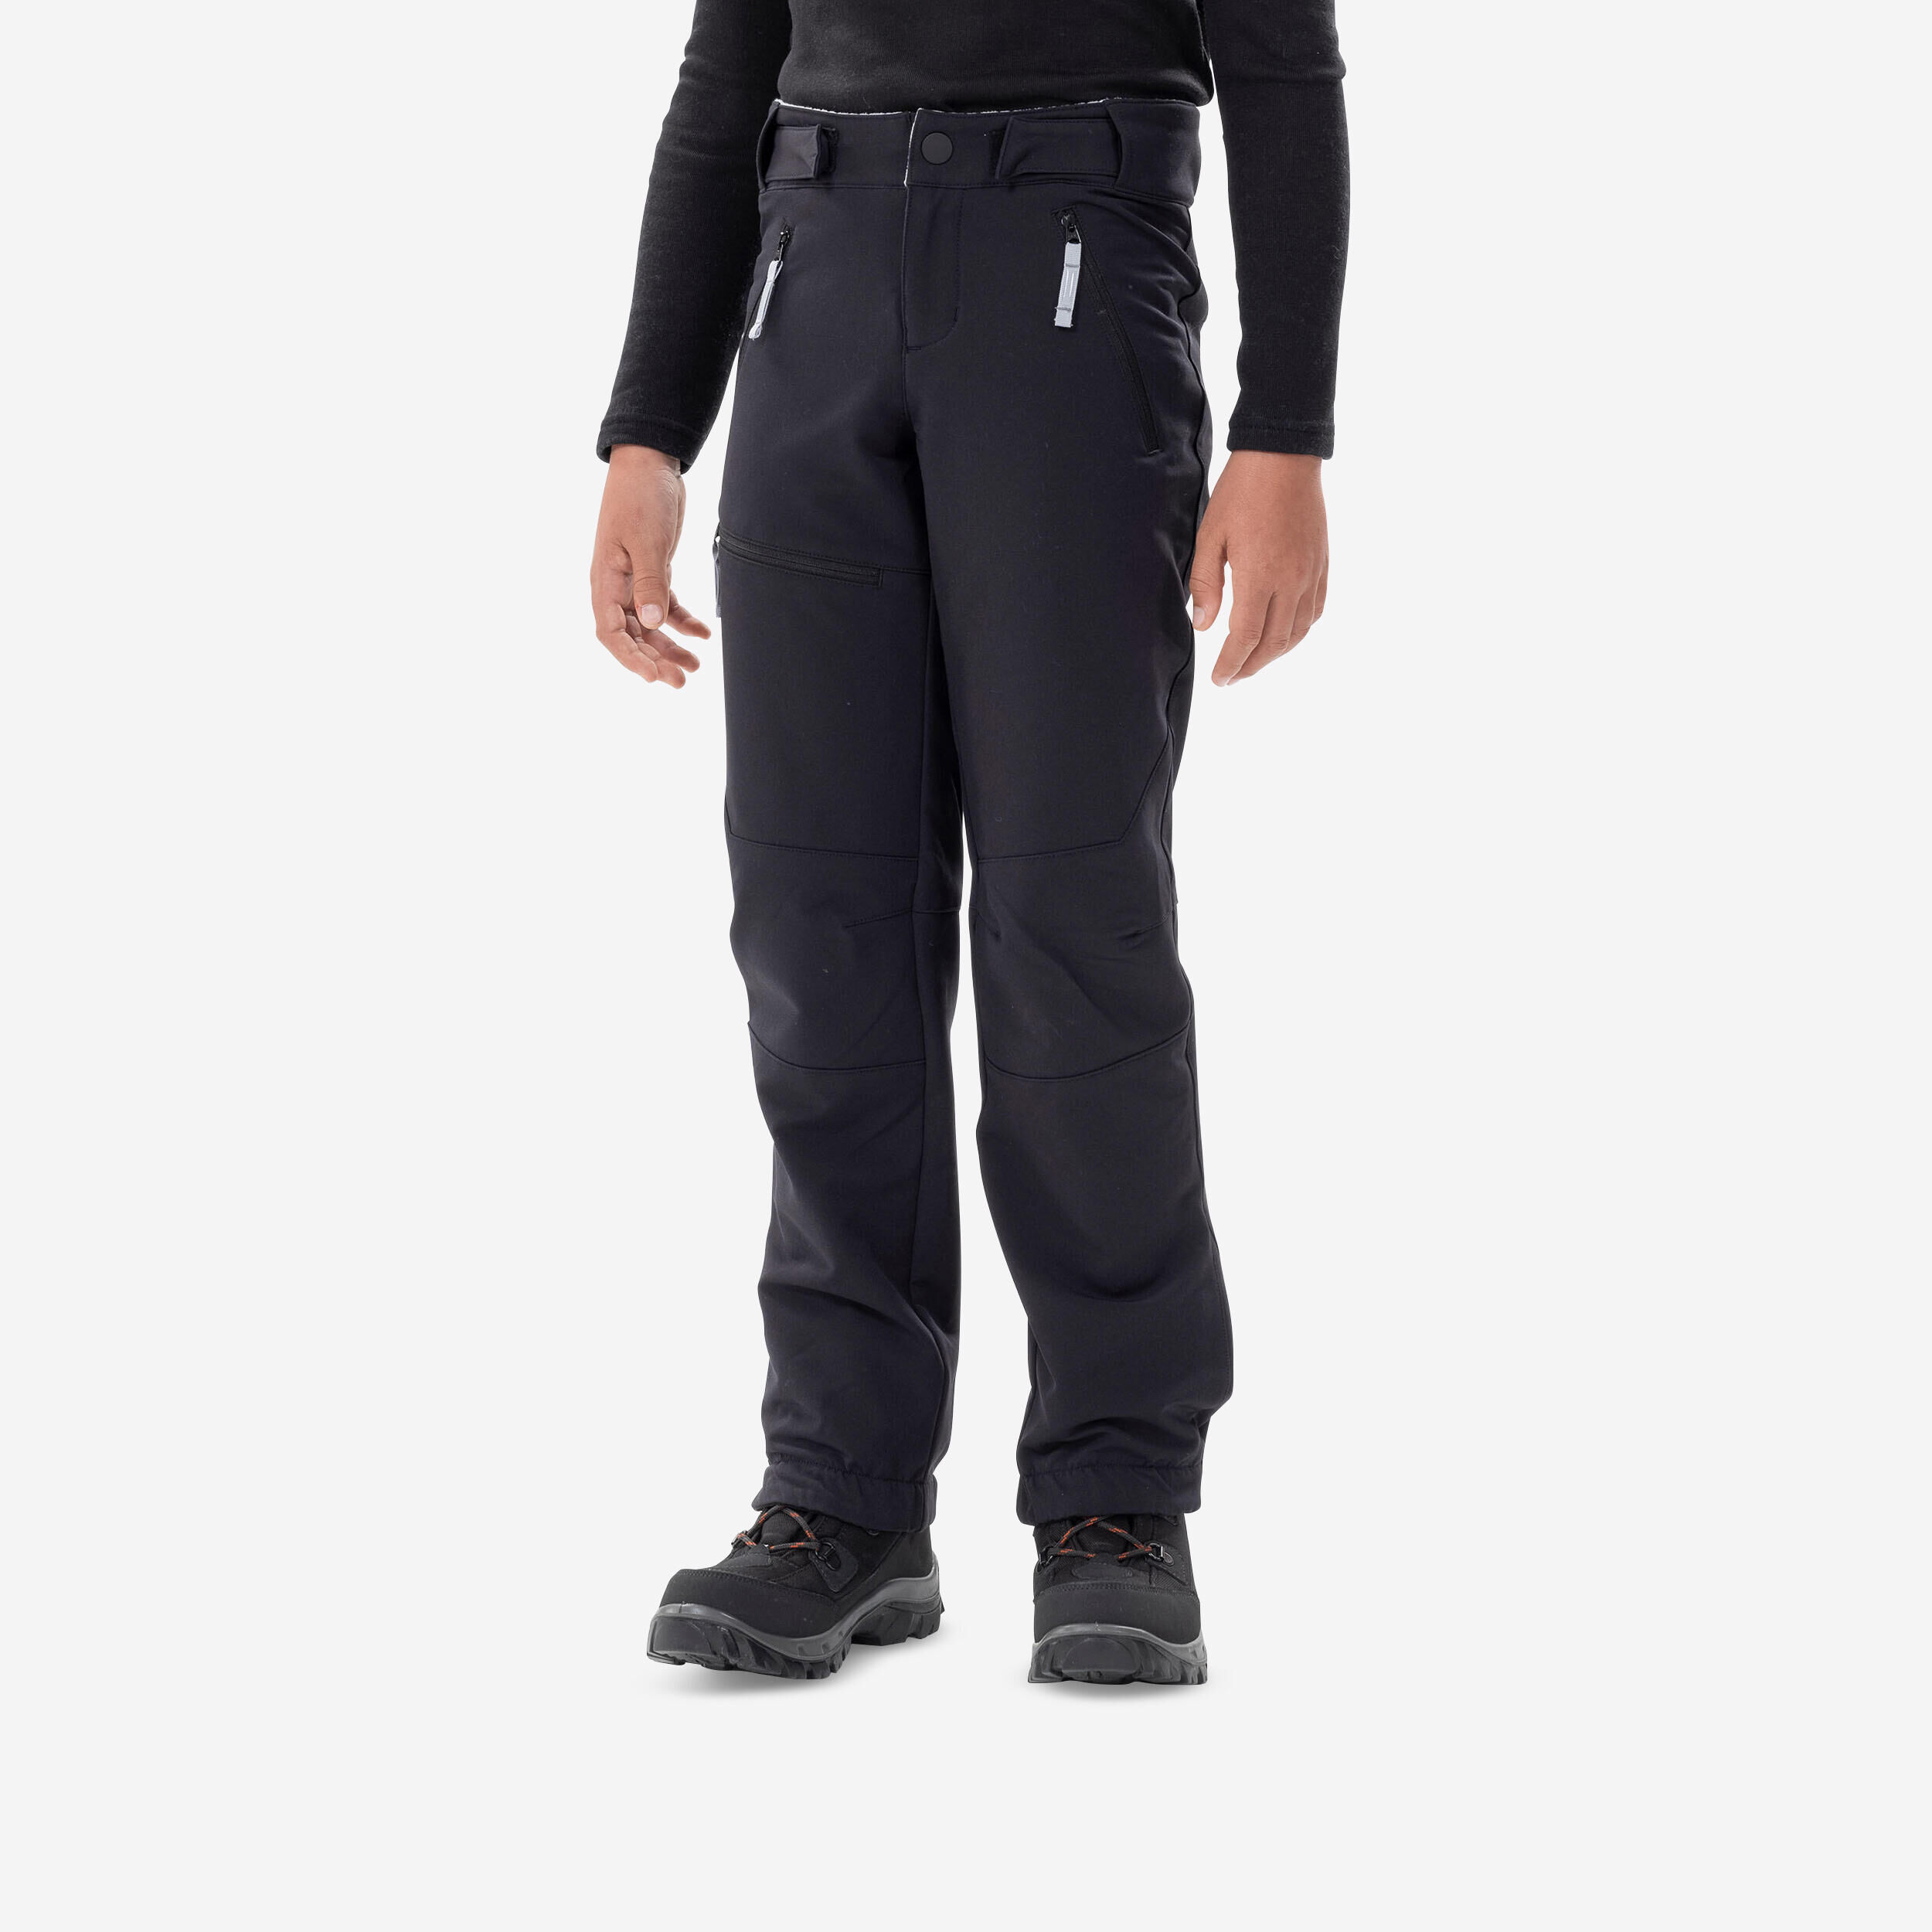 QUECHUA Kids’ Warm Hiking Softshell Trousers - SH500 Mountain - Ages 7-15